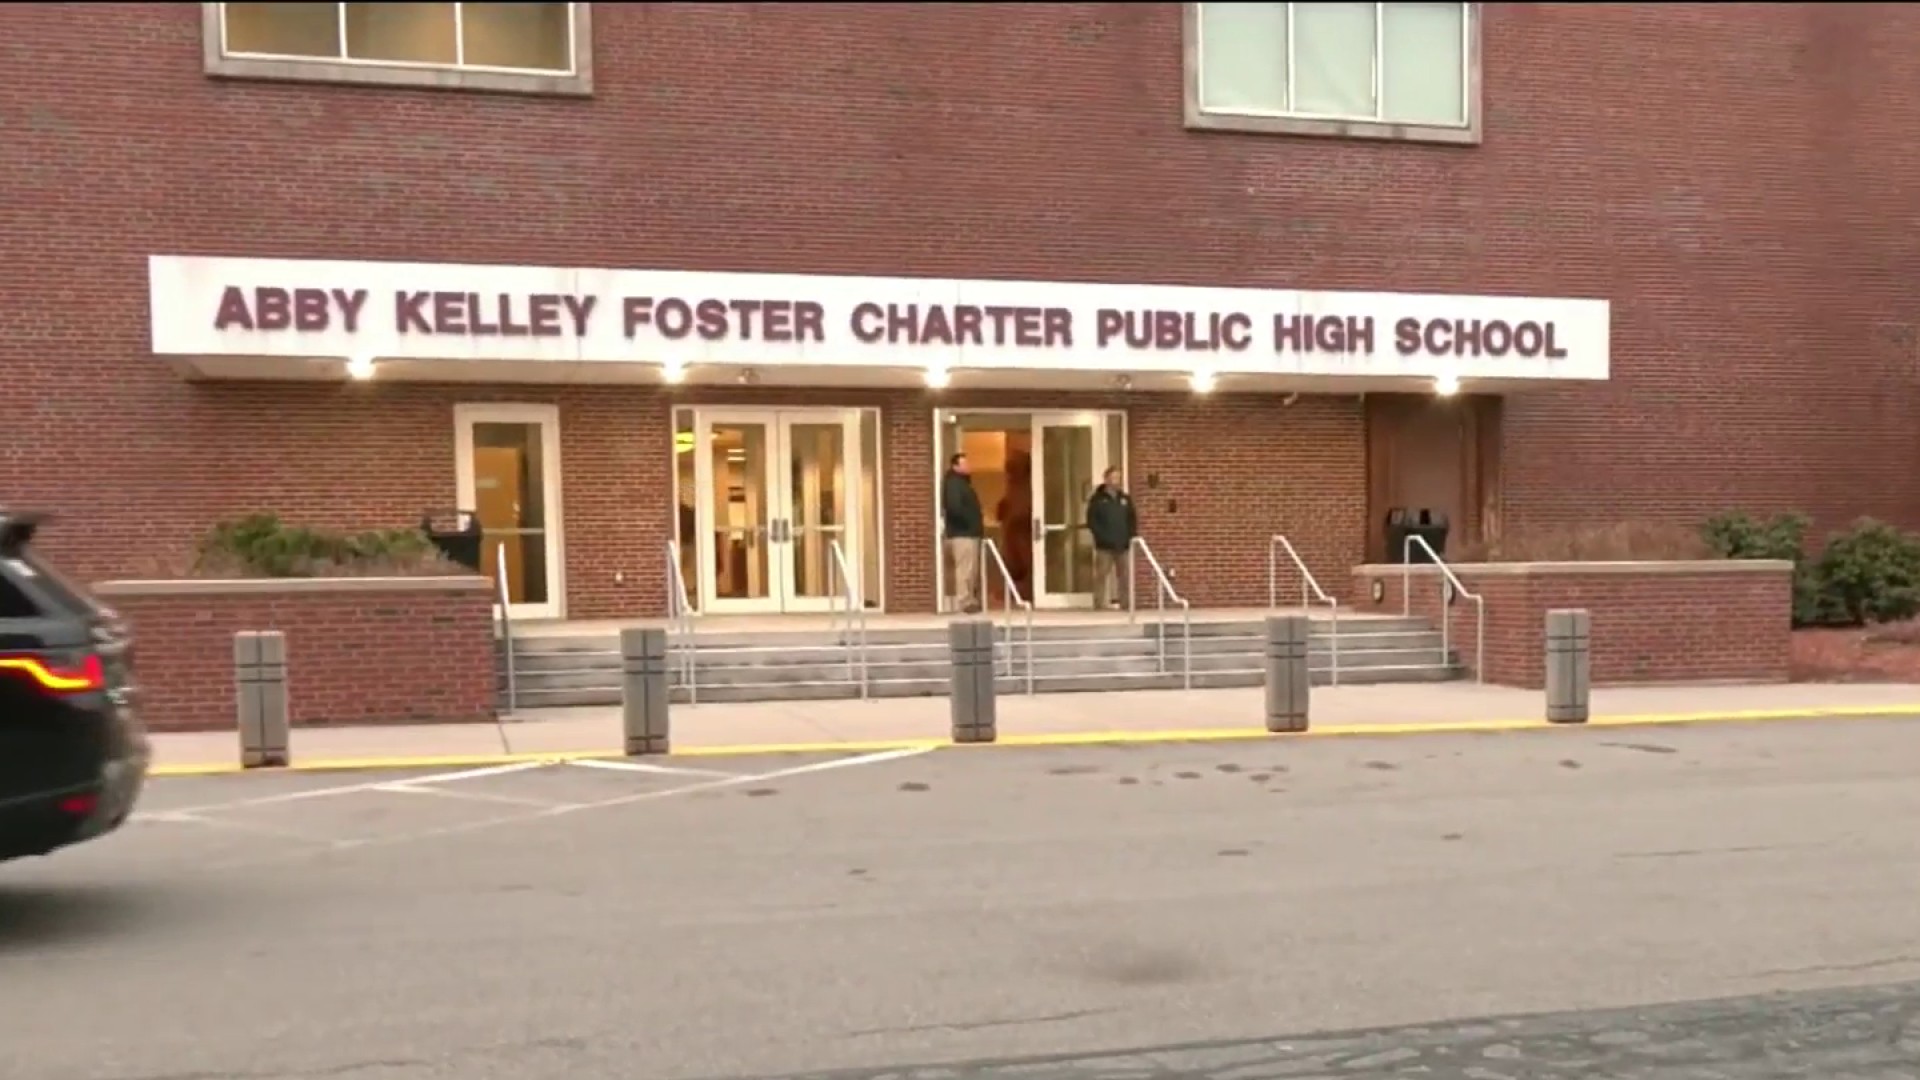 Incident involving cheer coaches at Mass. school under police investigation